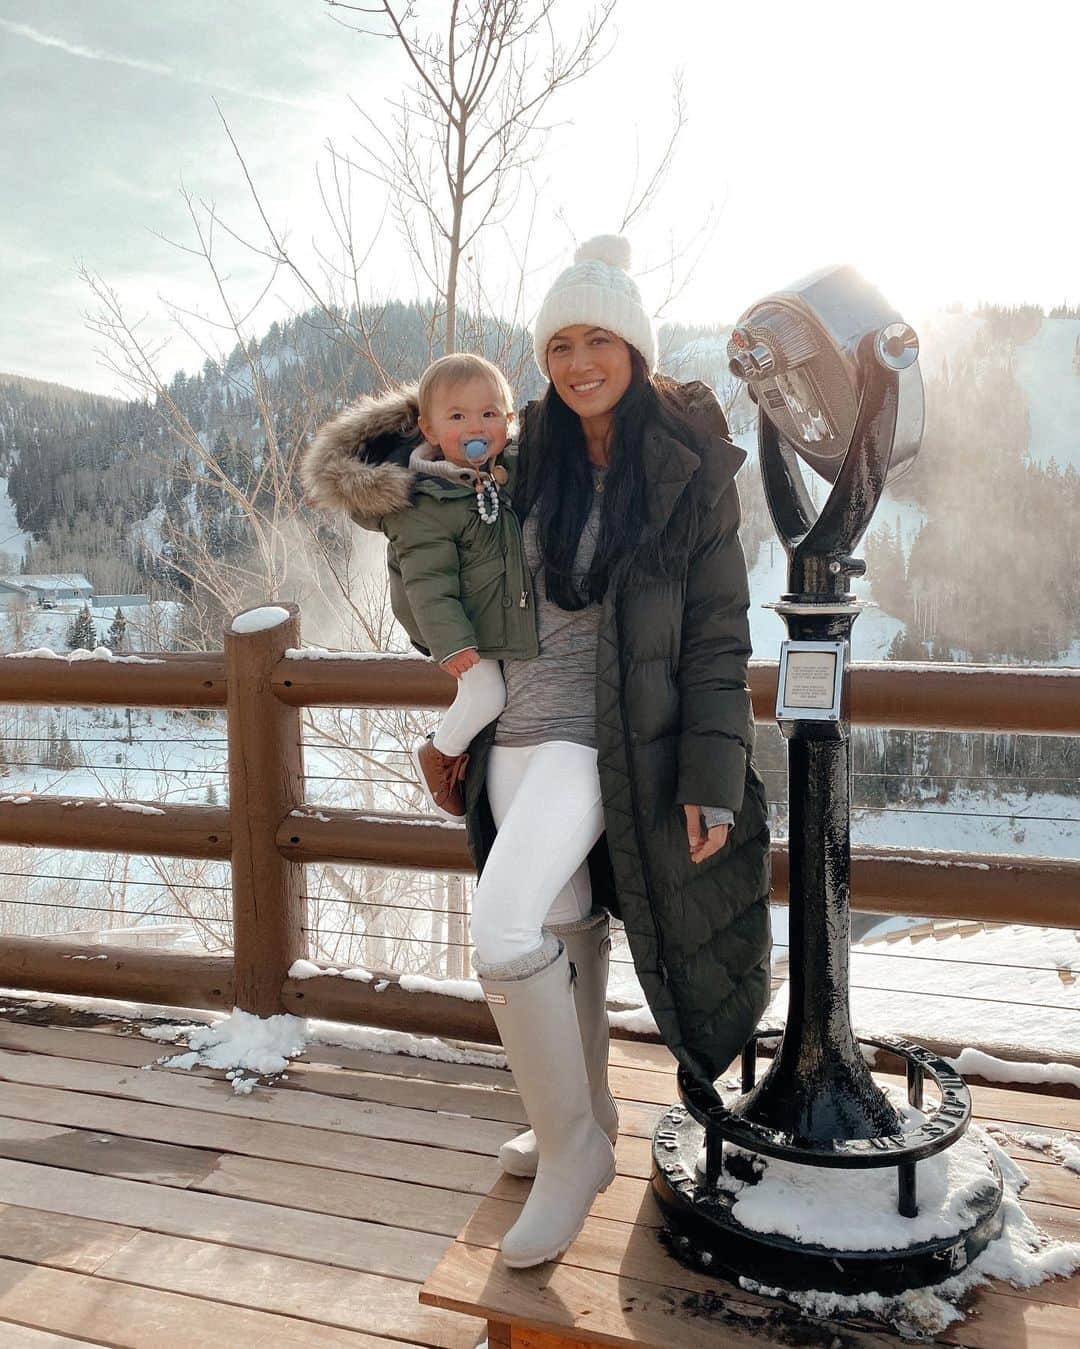 Bianca Cheah Chalmersのインスタグラム：「They said long road trips with our little one will be hard. He’ll cry, he’ll be restless and he’ll get bored in his rear facing seat. But here we are, on our 6th road trip cruising along, with him totally loving the ride. Our first road trip with Oliver was when he was just 8 weeks old which was the longest one at 10 hours in the car 😩 (supposed to be 6 hours). It was hard for us all and we vowed to never travel with him after that, but it was that first trip that we learned a lot of what NOT to do, and what TO do the right way. Road trip adventures is at the heart of our family and something that we all really enjoy, so we worked out what works for Oliver. I’d heard so many stories of parents who suddenly stopped travelling because of their little ones and how it all became way too hard — I hear you! But after a lot of trial and error it’s become a breeze. Not sure if this helps any other parents, but something that I ALWAYS do on road trips is I actually sit in the back seat with him, and tilt his car seat back so it’s reclined (a tip that the car seat expert gave me which works a treat). That way I can still feed him easily, play with him, monitor him for any uncomfortable cues and help him to sleep. Also being prepared is key, having a bag stocked with snacks, toys, milk and water, nappies/ diapers on hand and a mirror fitted to the back seat so he can still watch the world pass by has also helped a lot. Realistically, I think if I wasn’t sitting in the back seat with him, then our road trips would be a little more challenging — but I love sitting next to him while we travel and he loves it too. So here’s to plenty more on the road together.」